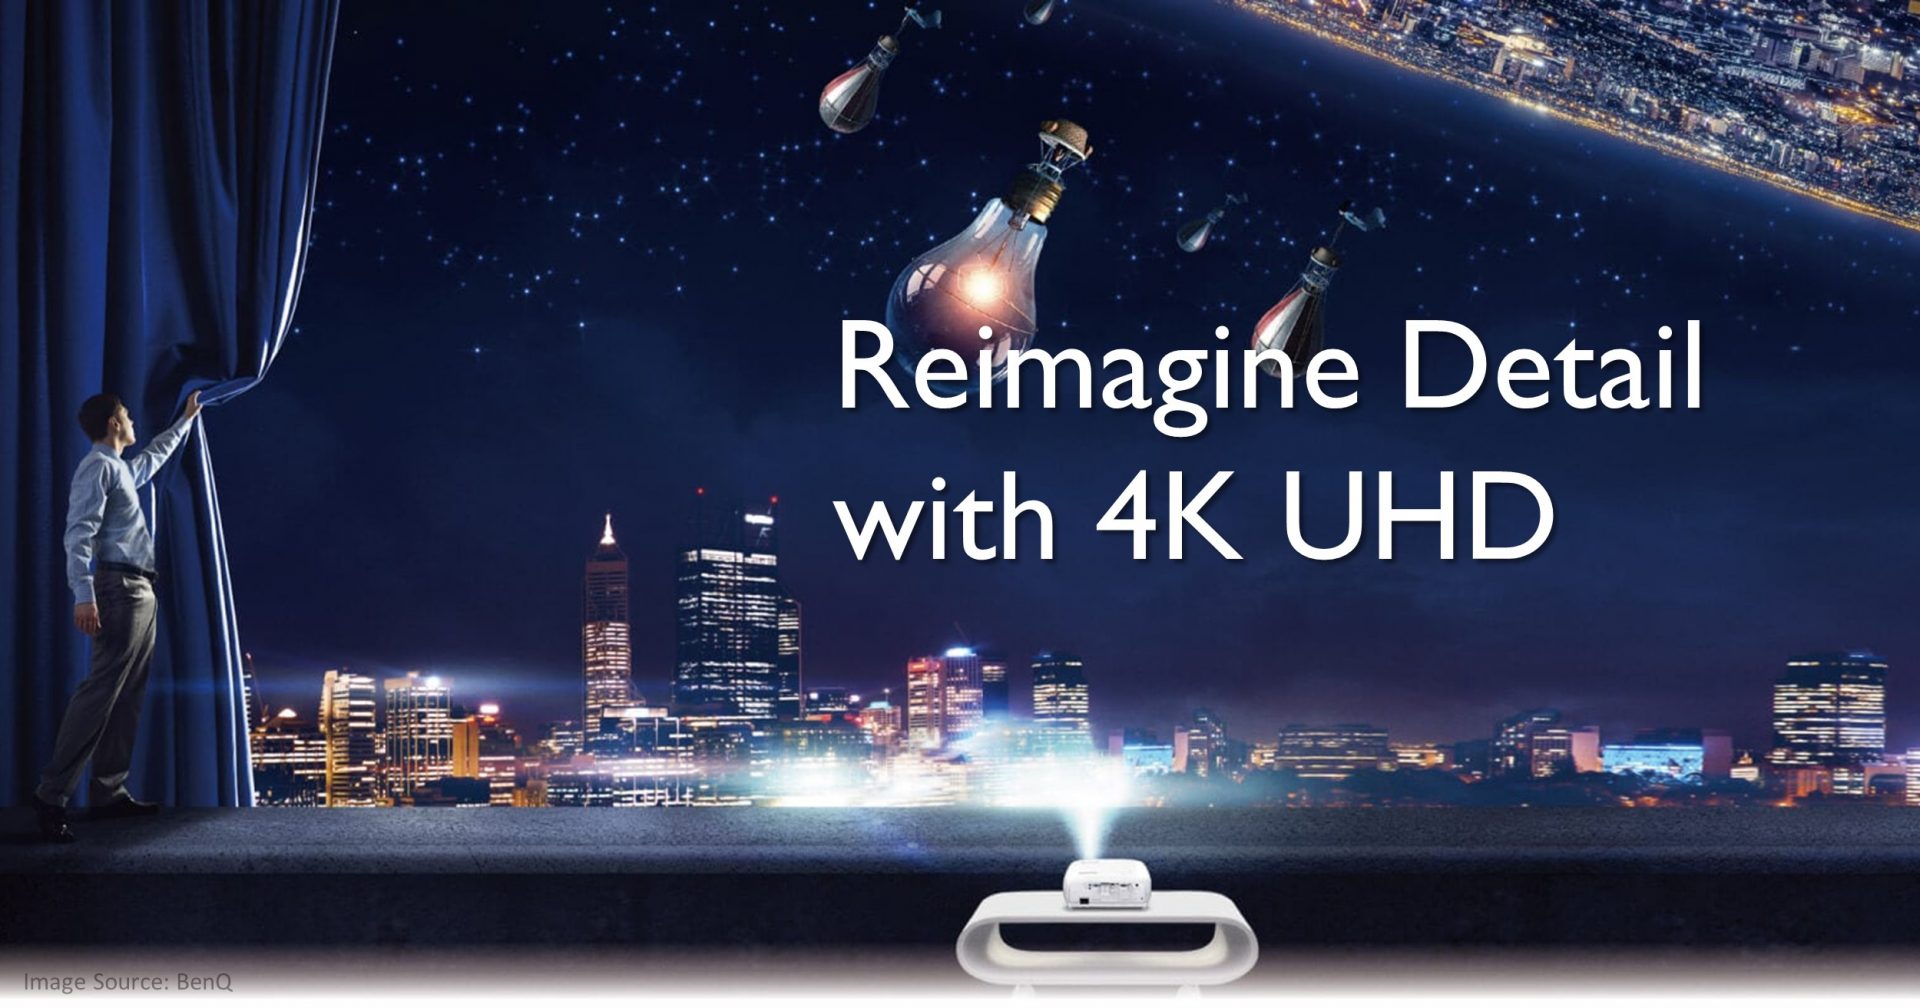 BenQ Launches World’s First 4K HDR Gaming Projector